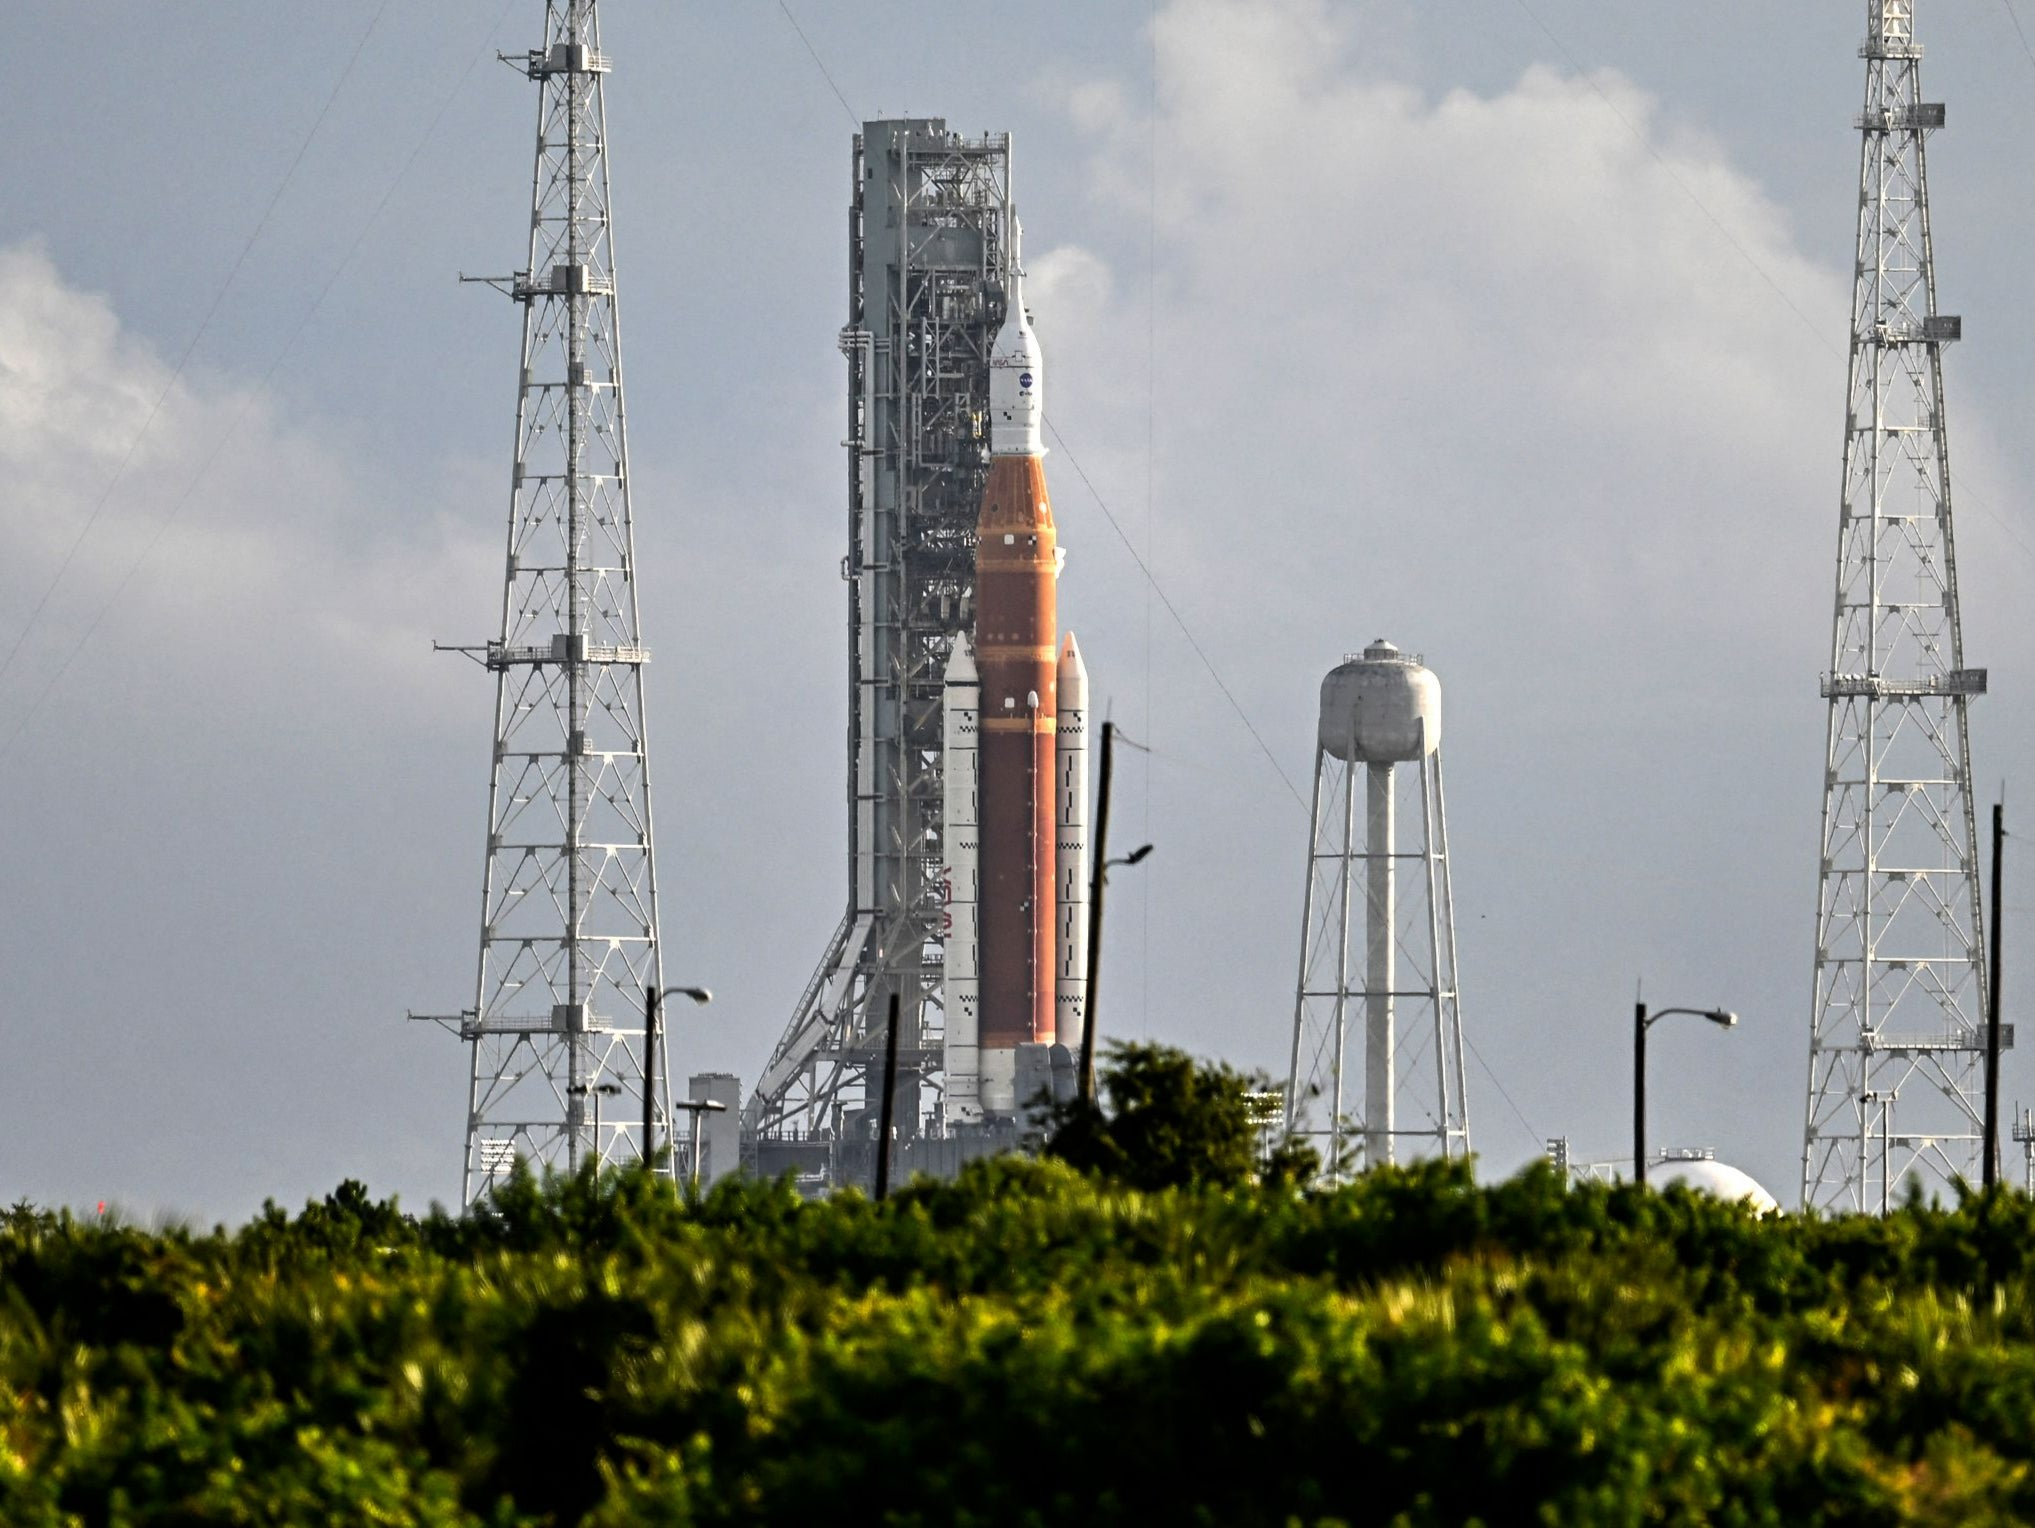 The Artemis I unmanned lunar rocket sits on the launchpad at the Kennedy Space Center in Cape Canaveral, Florida